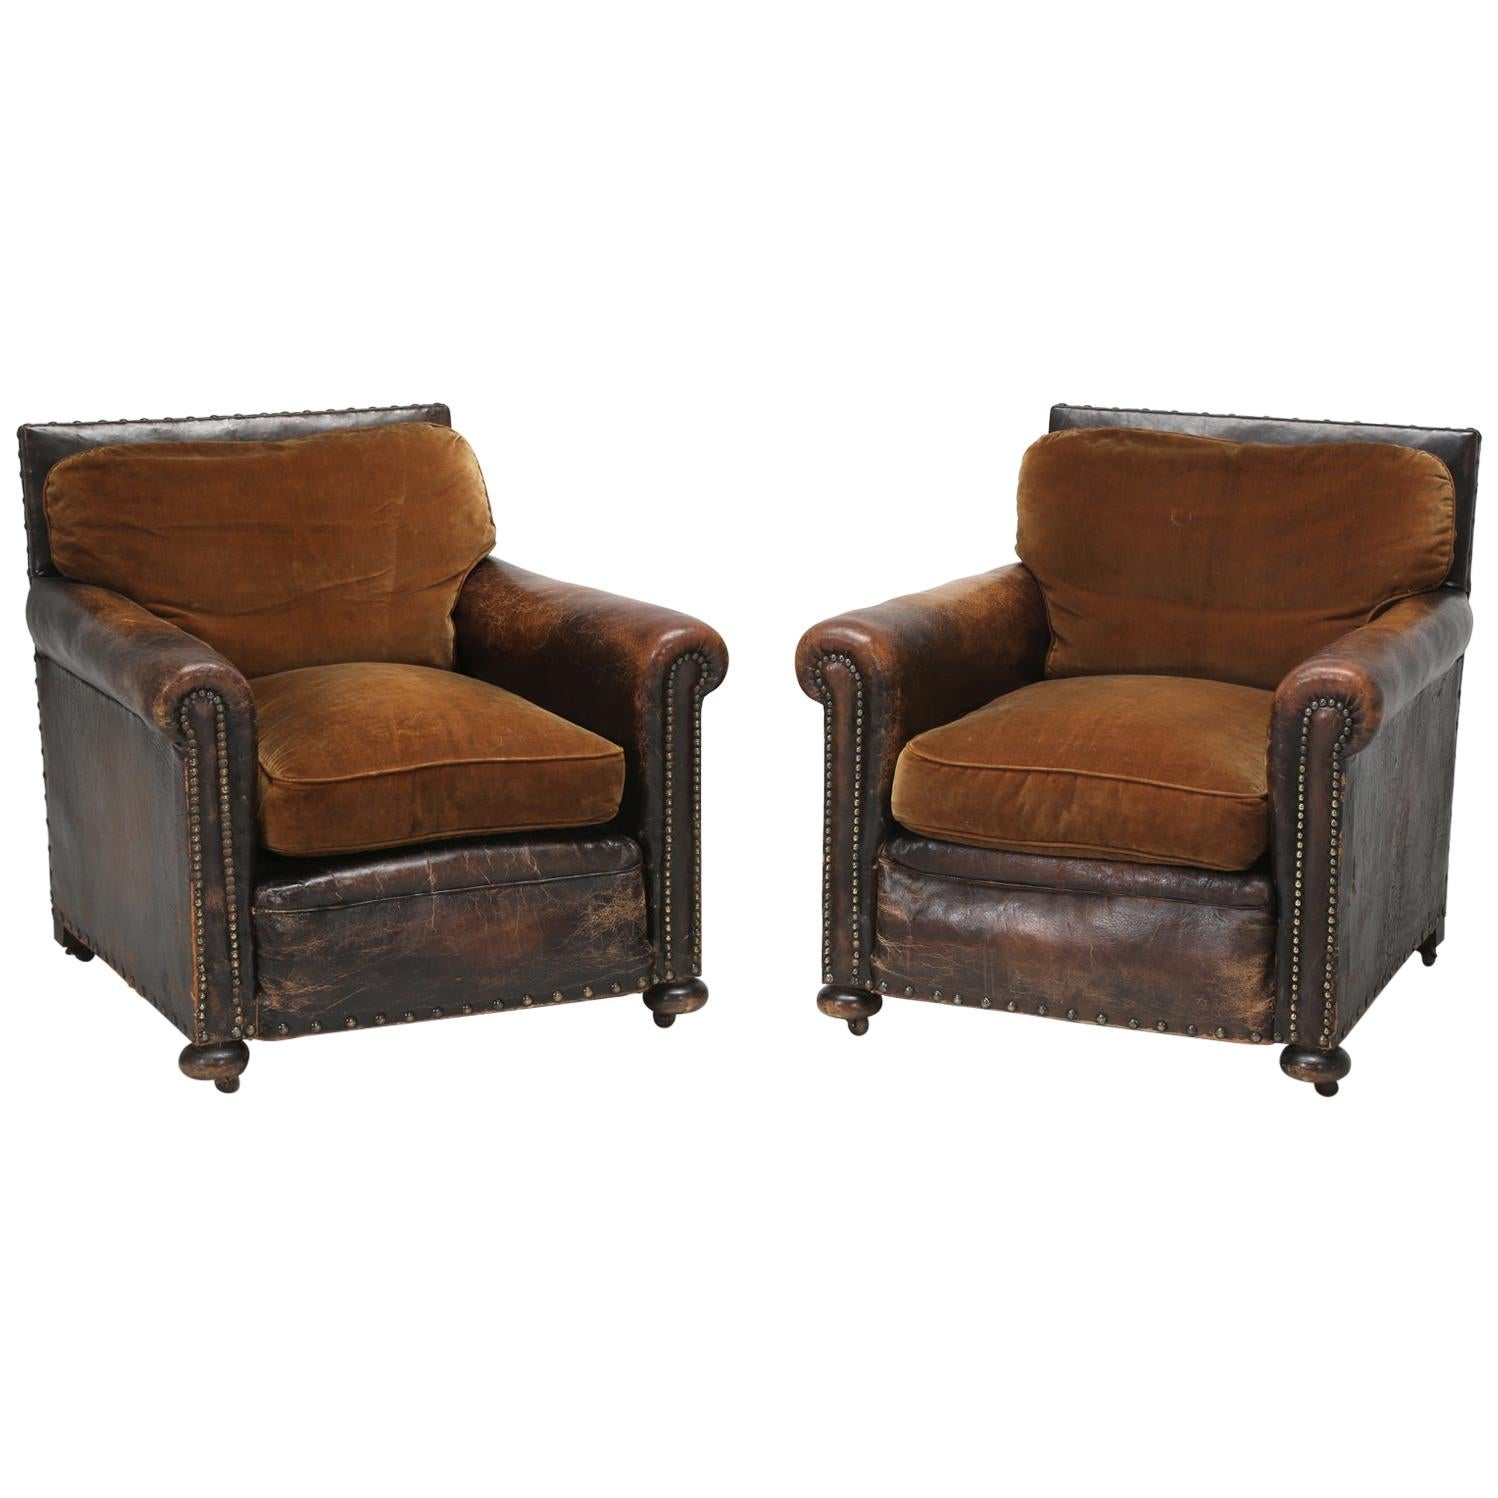 Antique Leather Club Chairs, Internally Restored Only, Cosmetically all Original